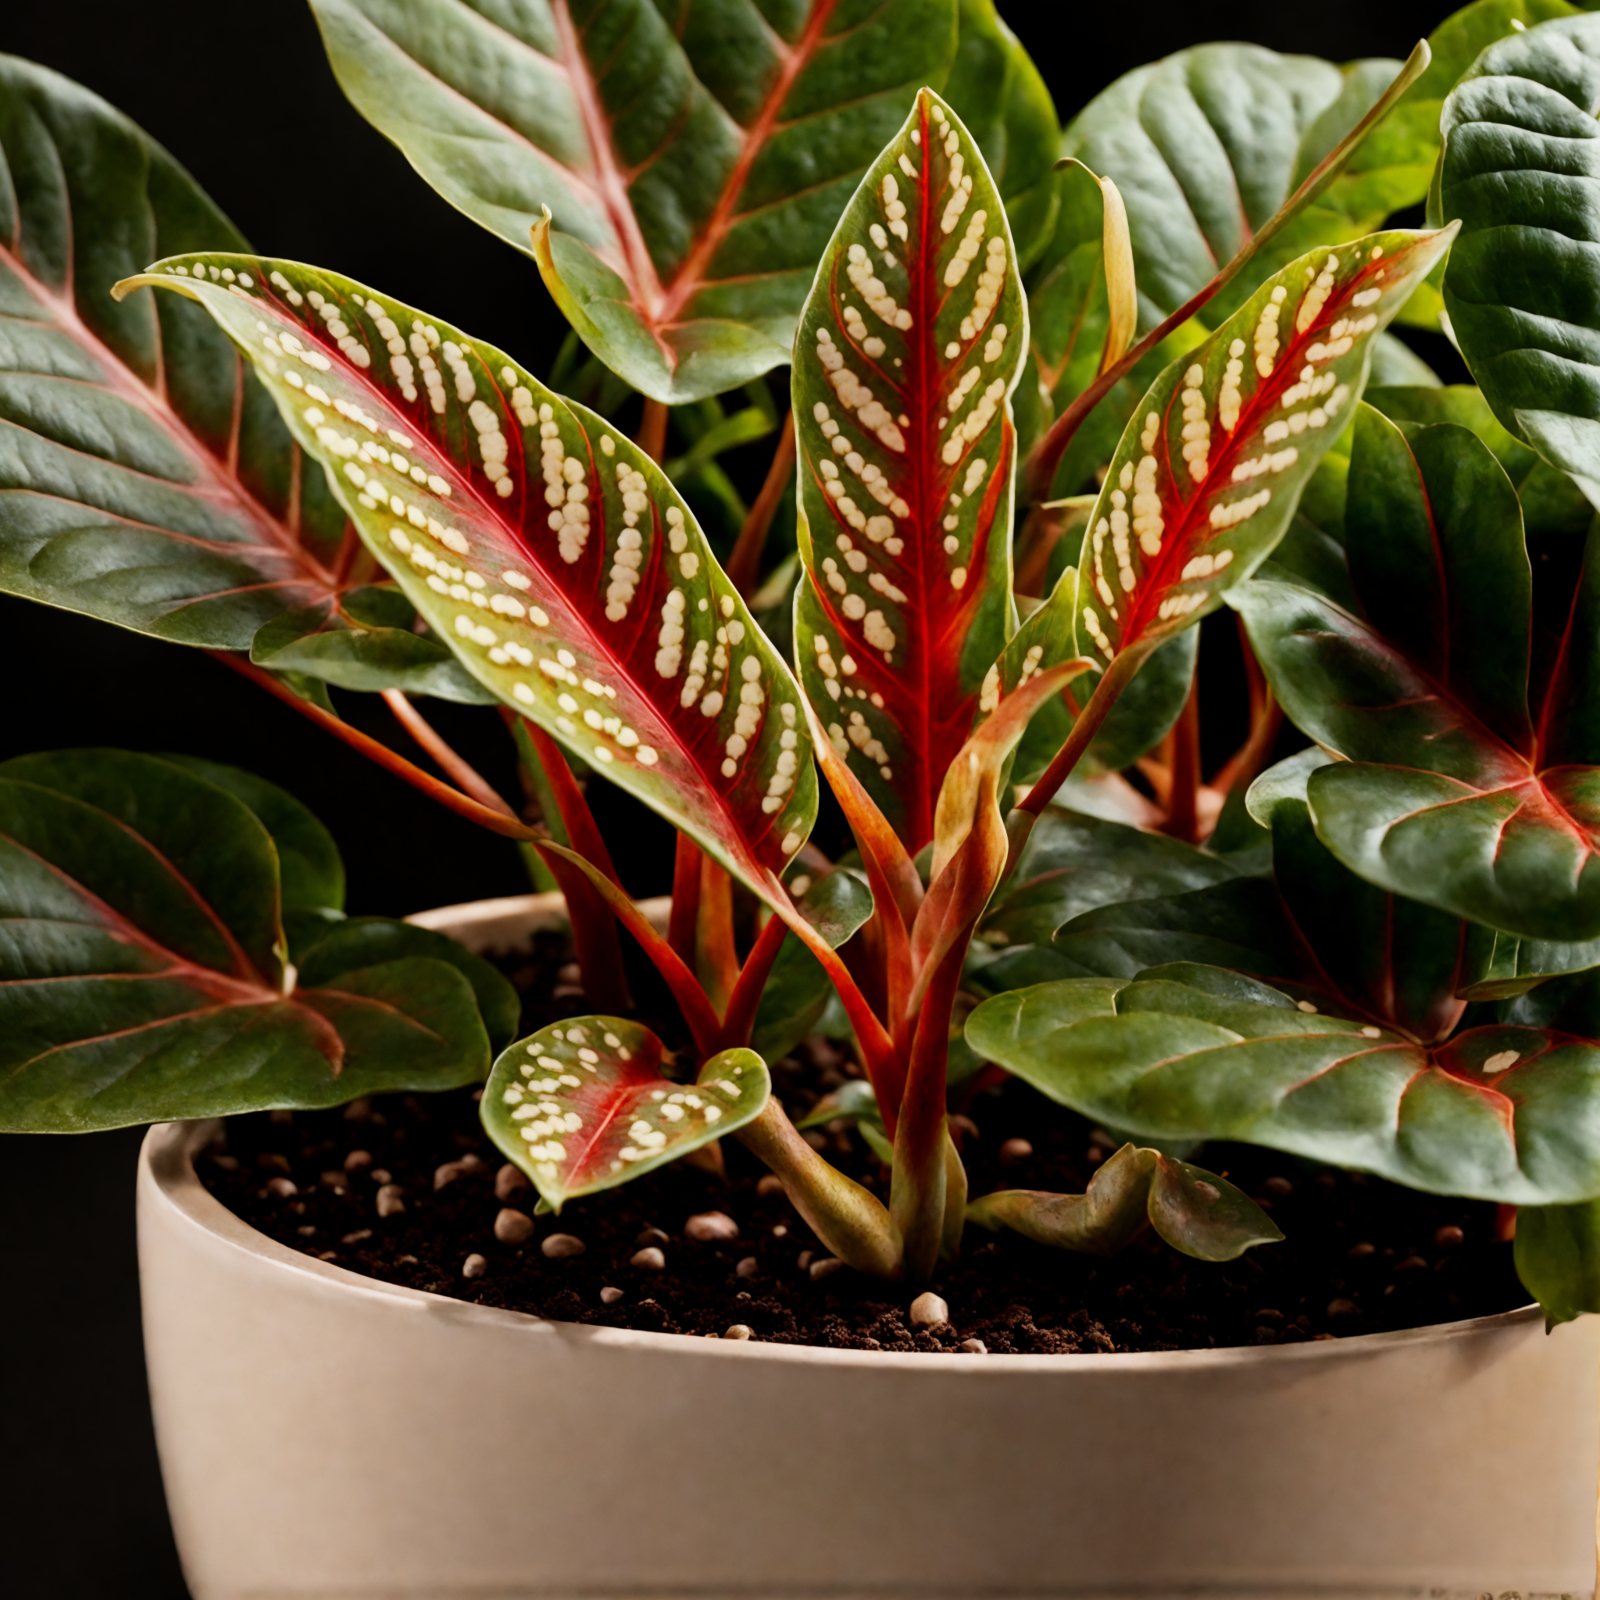 Caladium bicolor with vibrant leaves in a white bowl planter, clear lighting against a dark background.